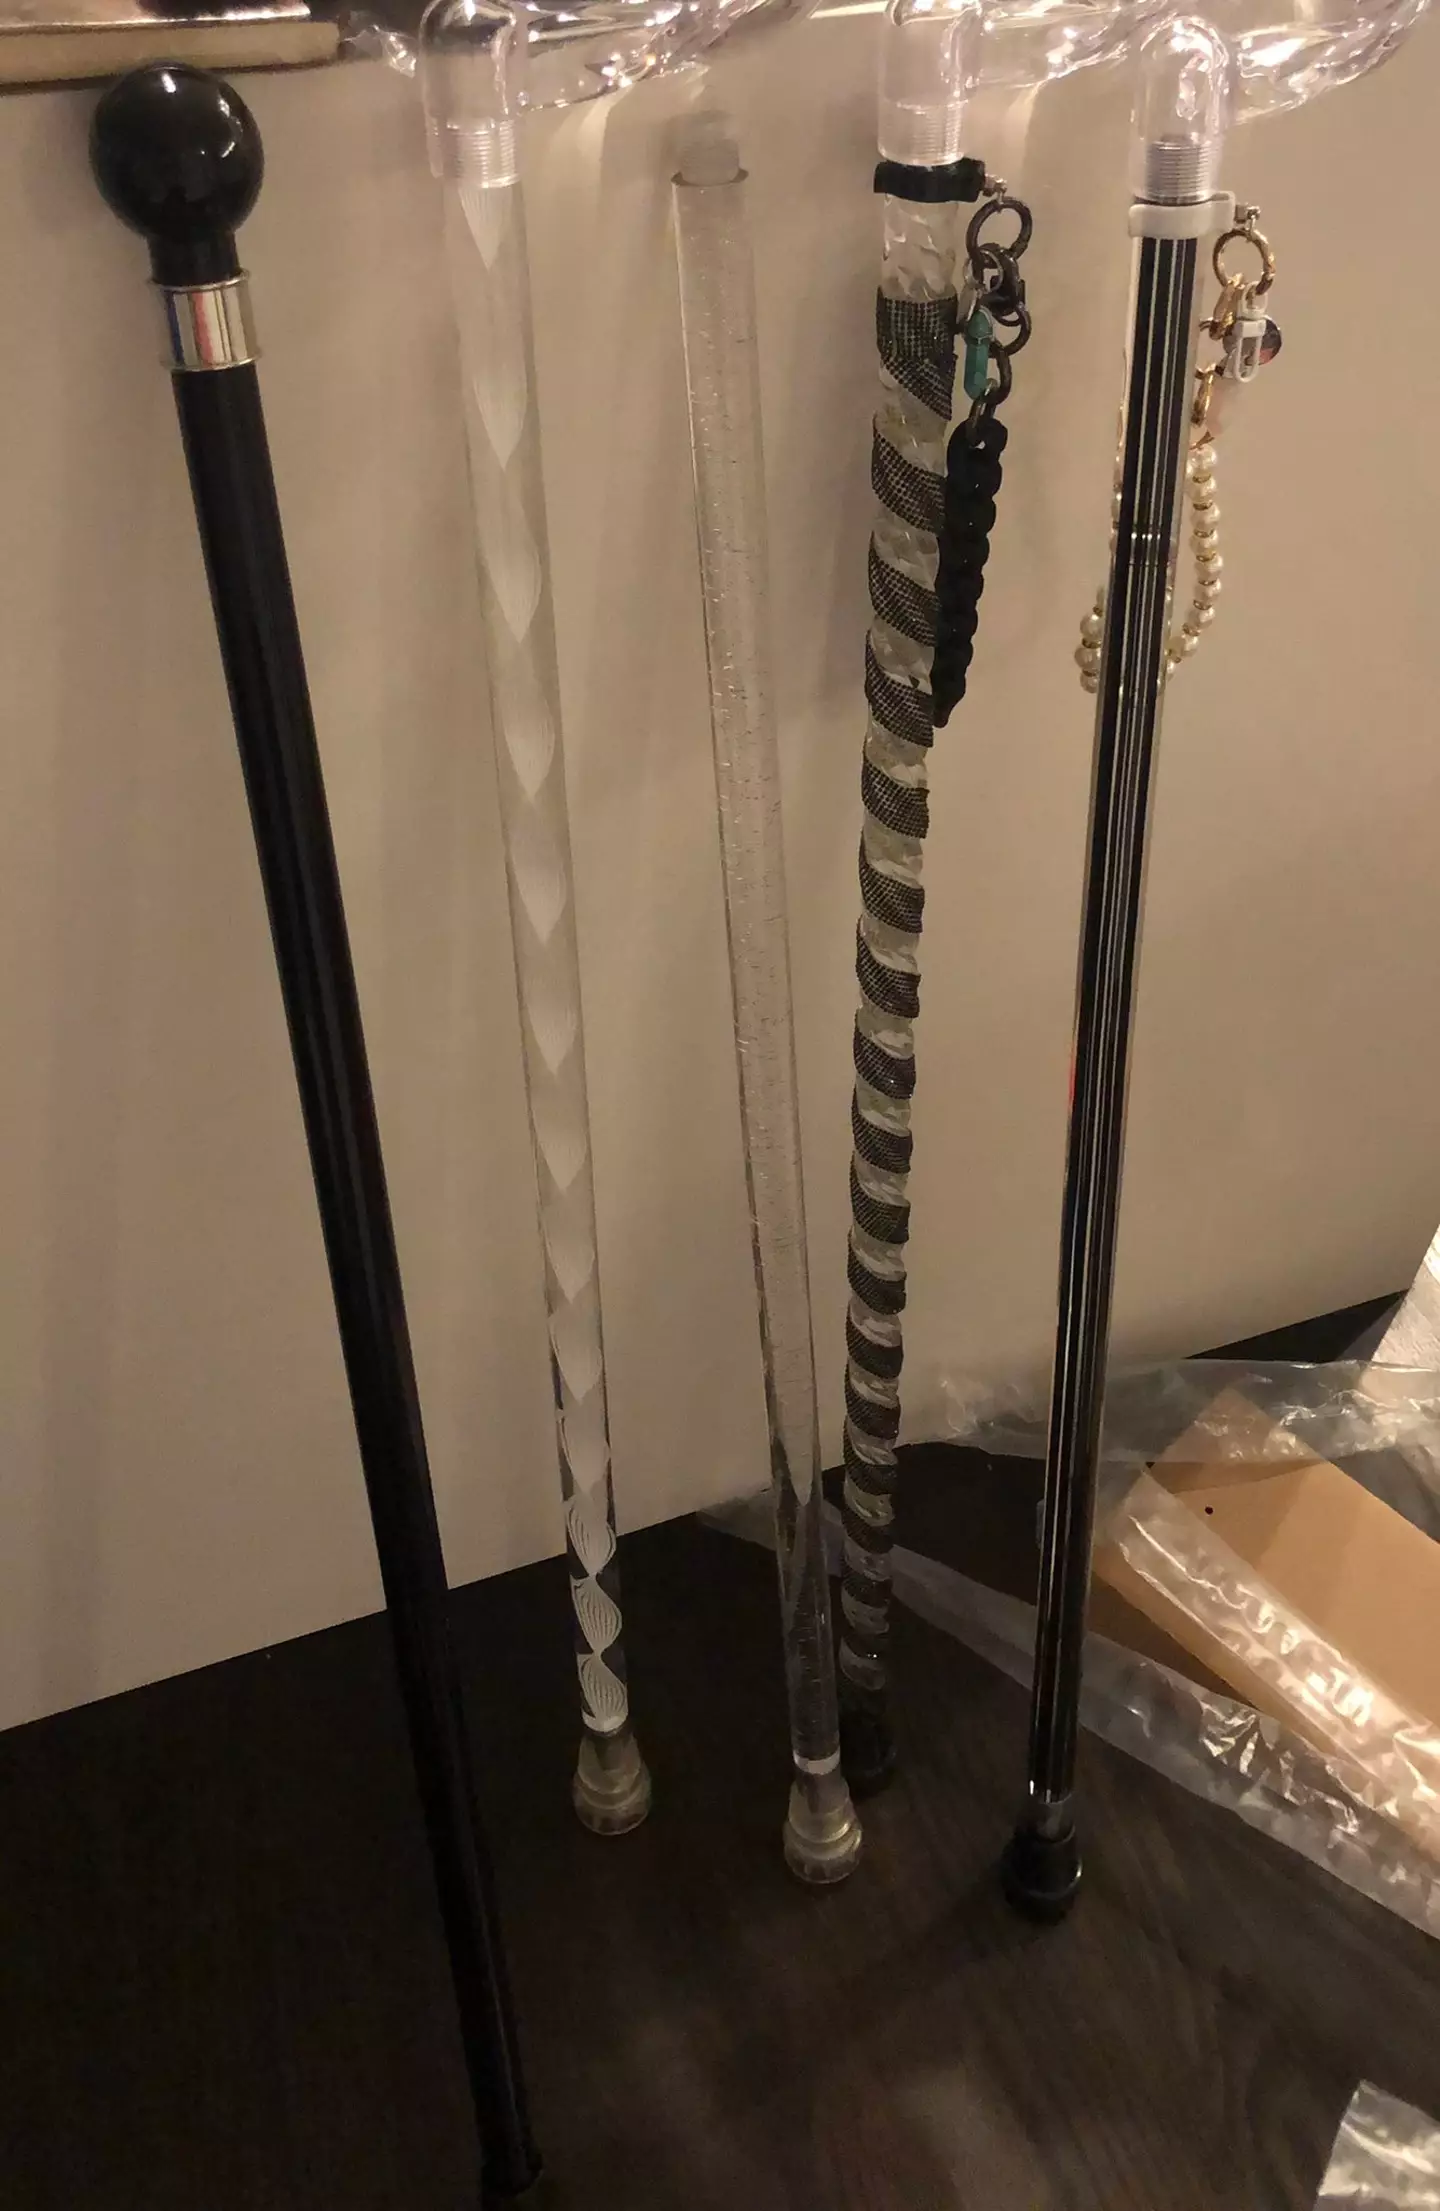 Christina Applegate tweeted a picture of her walking sticks.